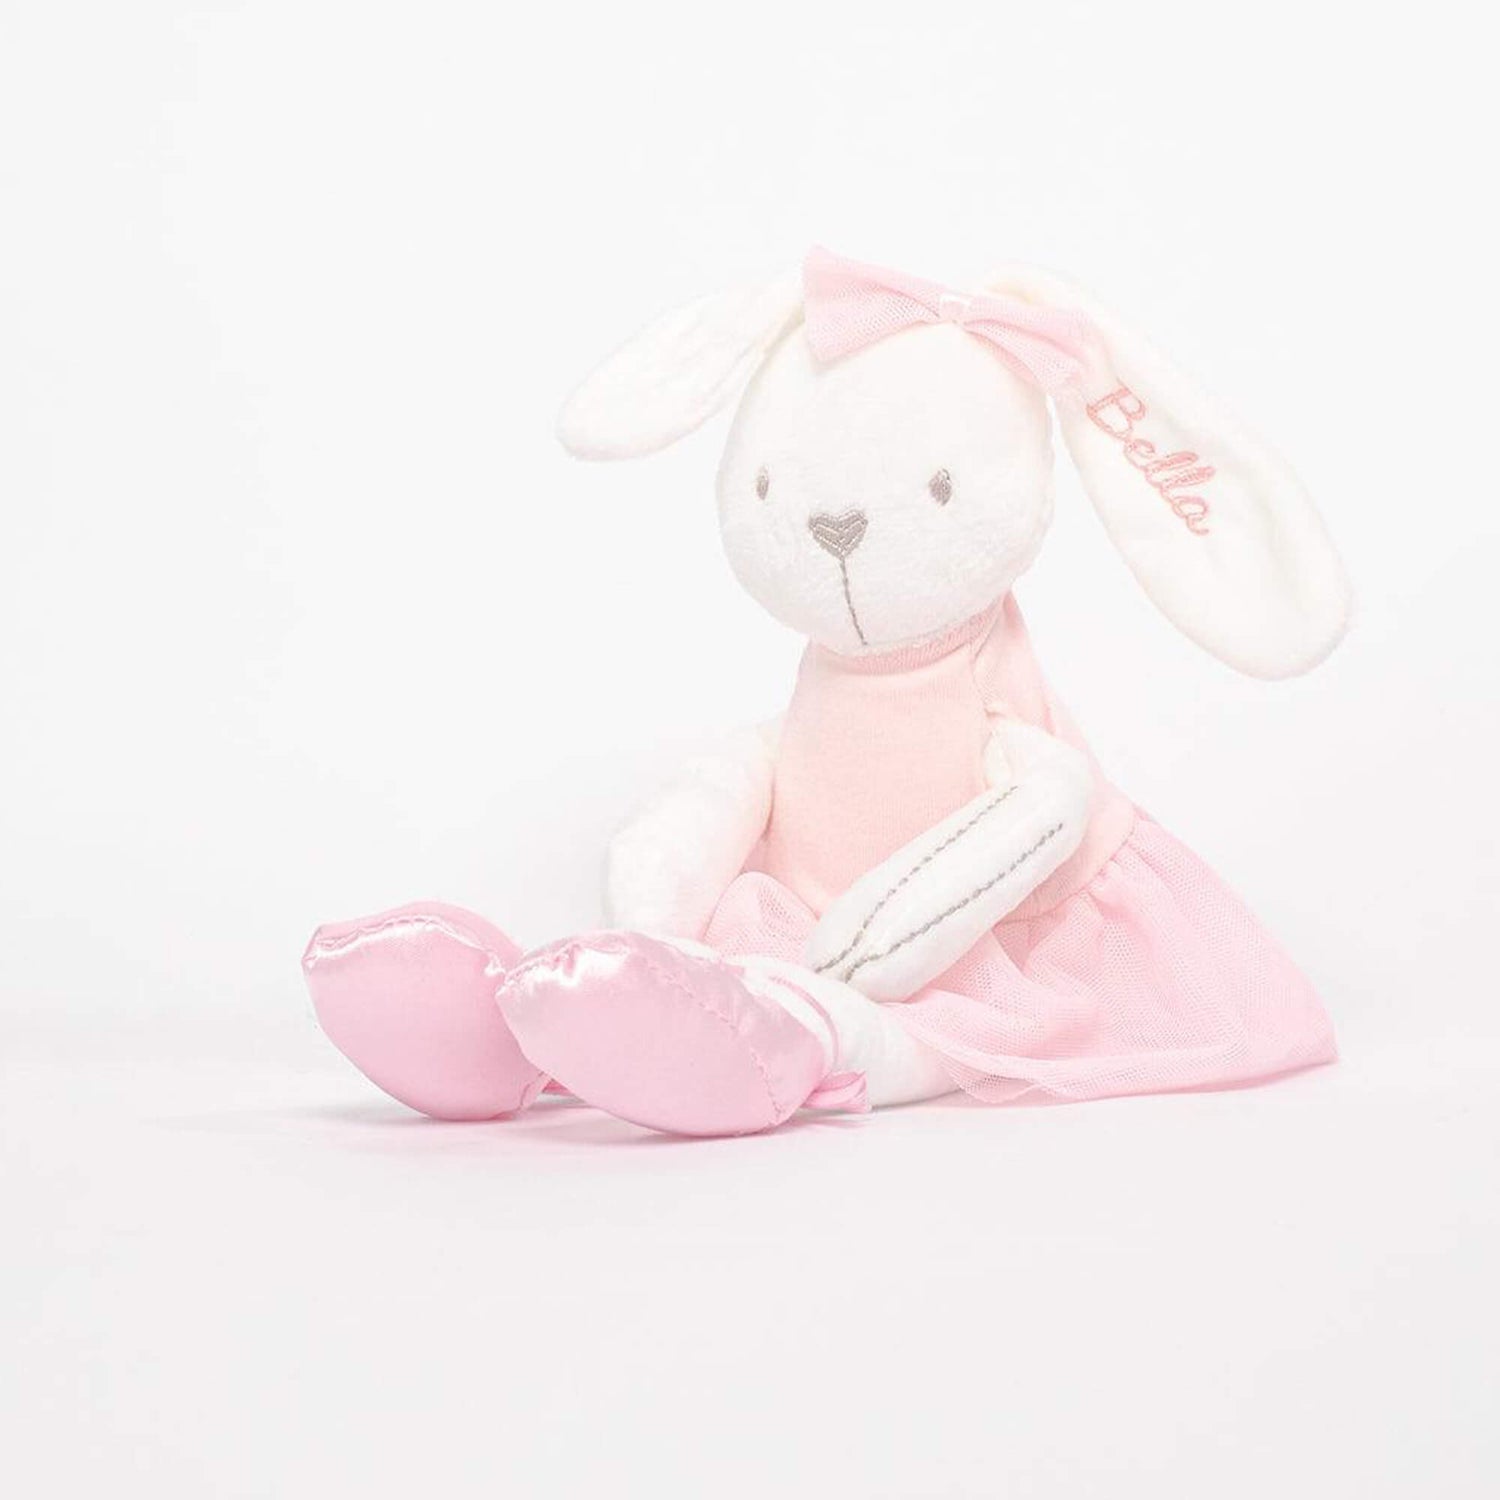 Pink Ballet dress bunny sitting infront of white background with the name embroidered.